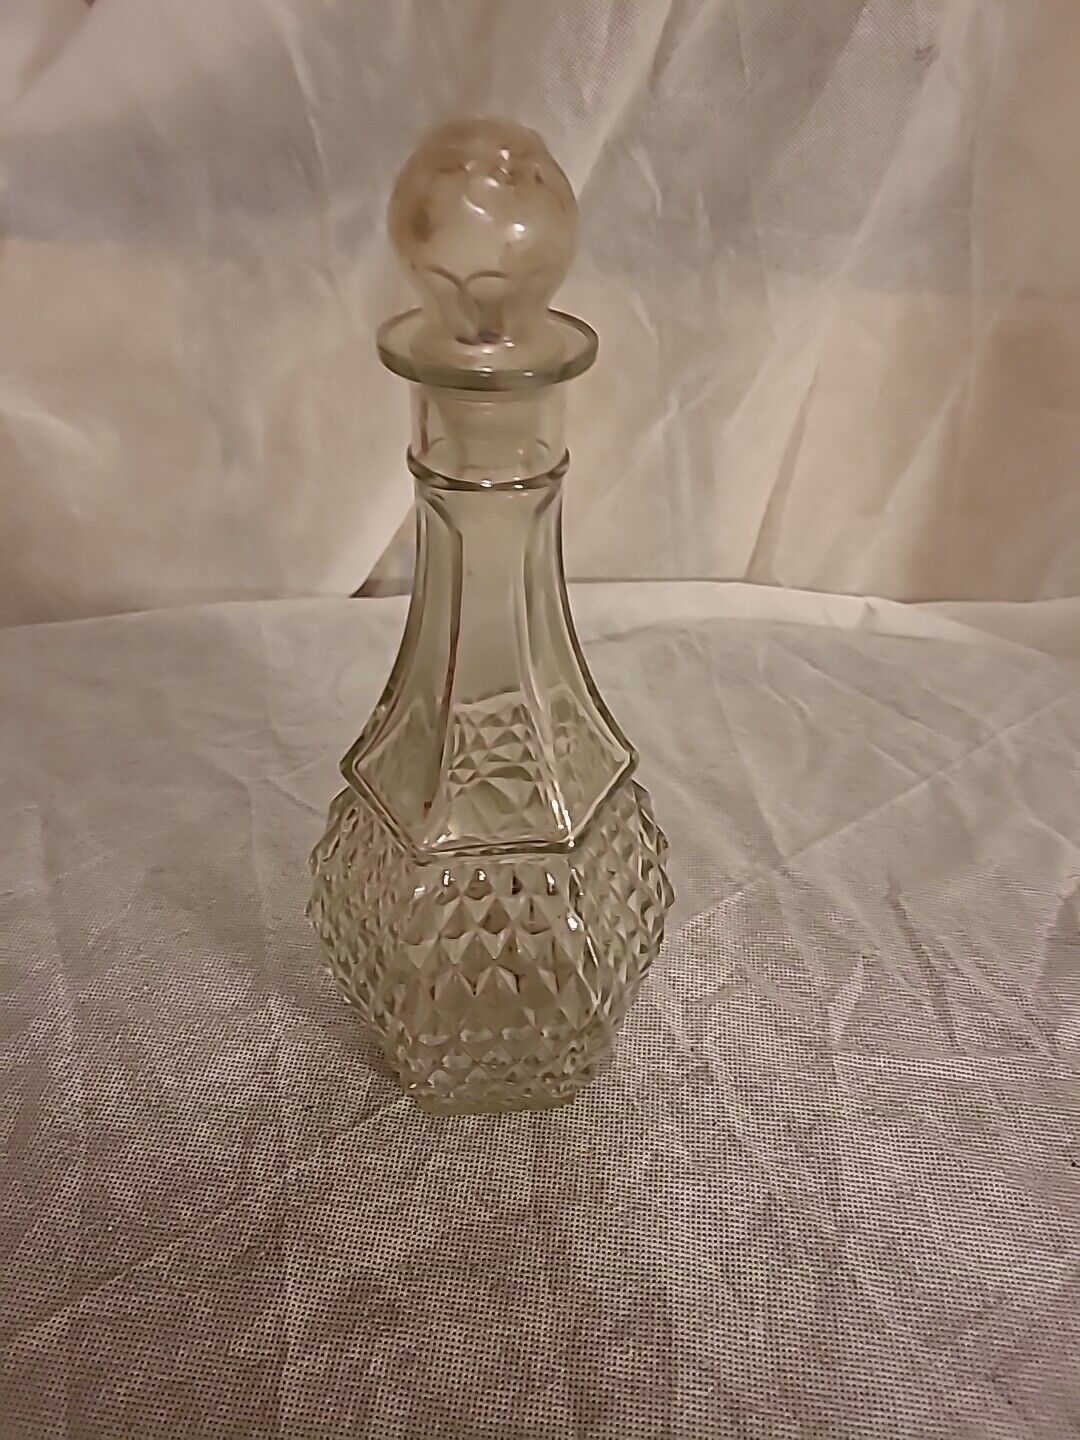 Vintage Glass Decanter Studded Cut Diamond Clear Liquor Bottle with Stopper 